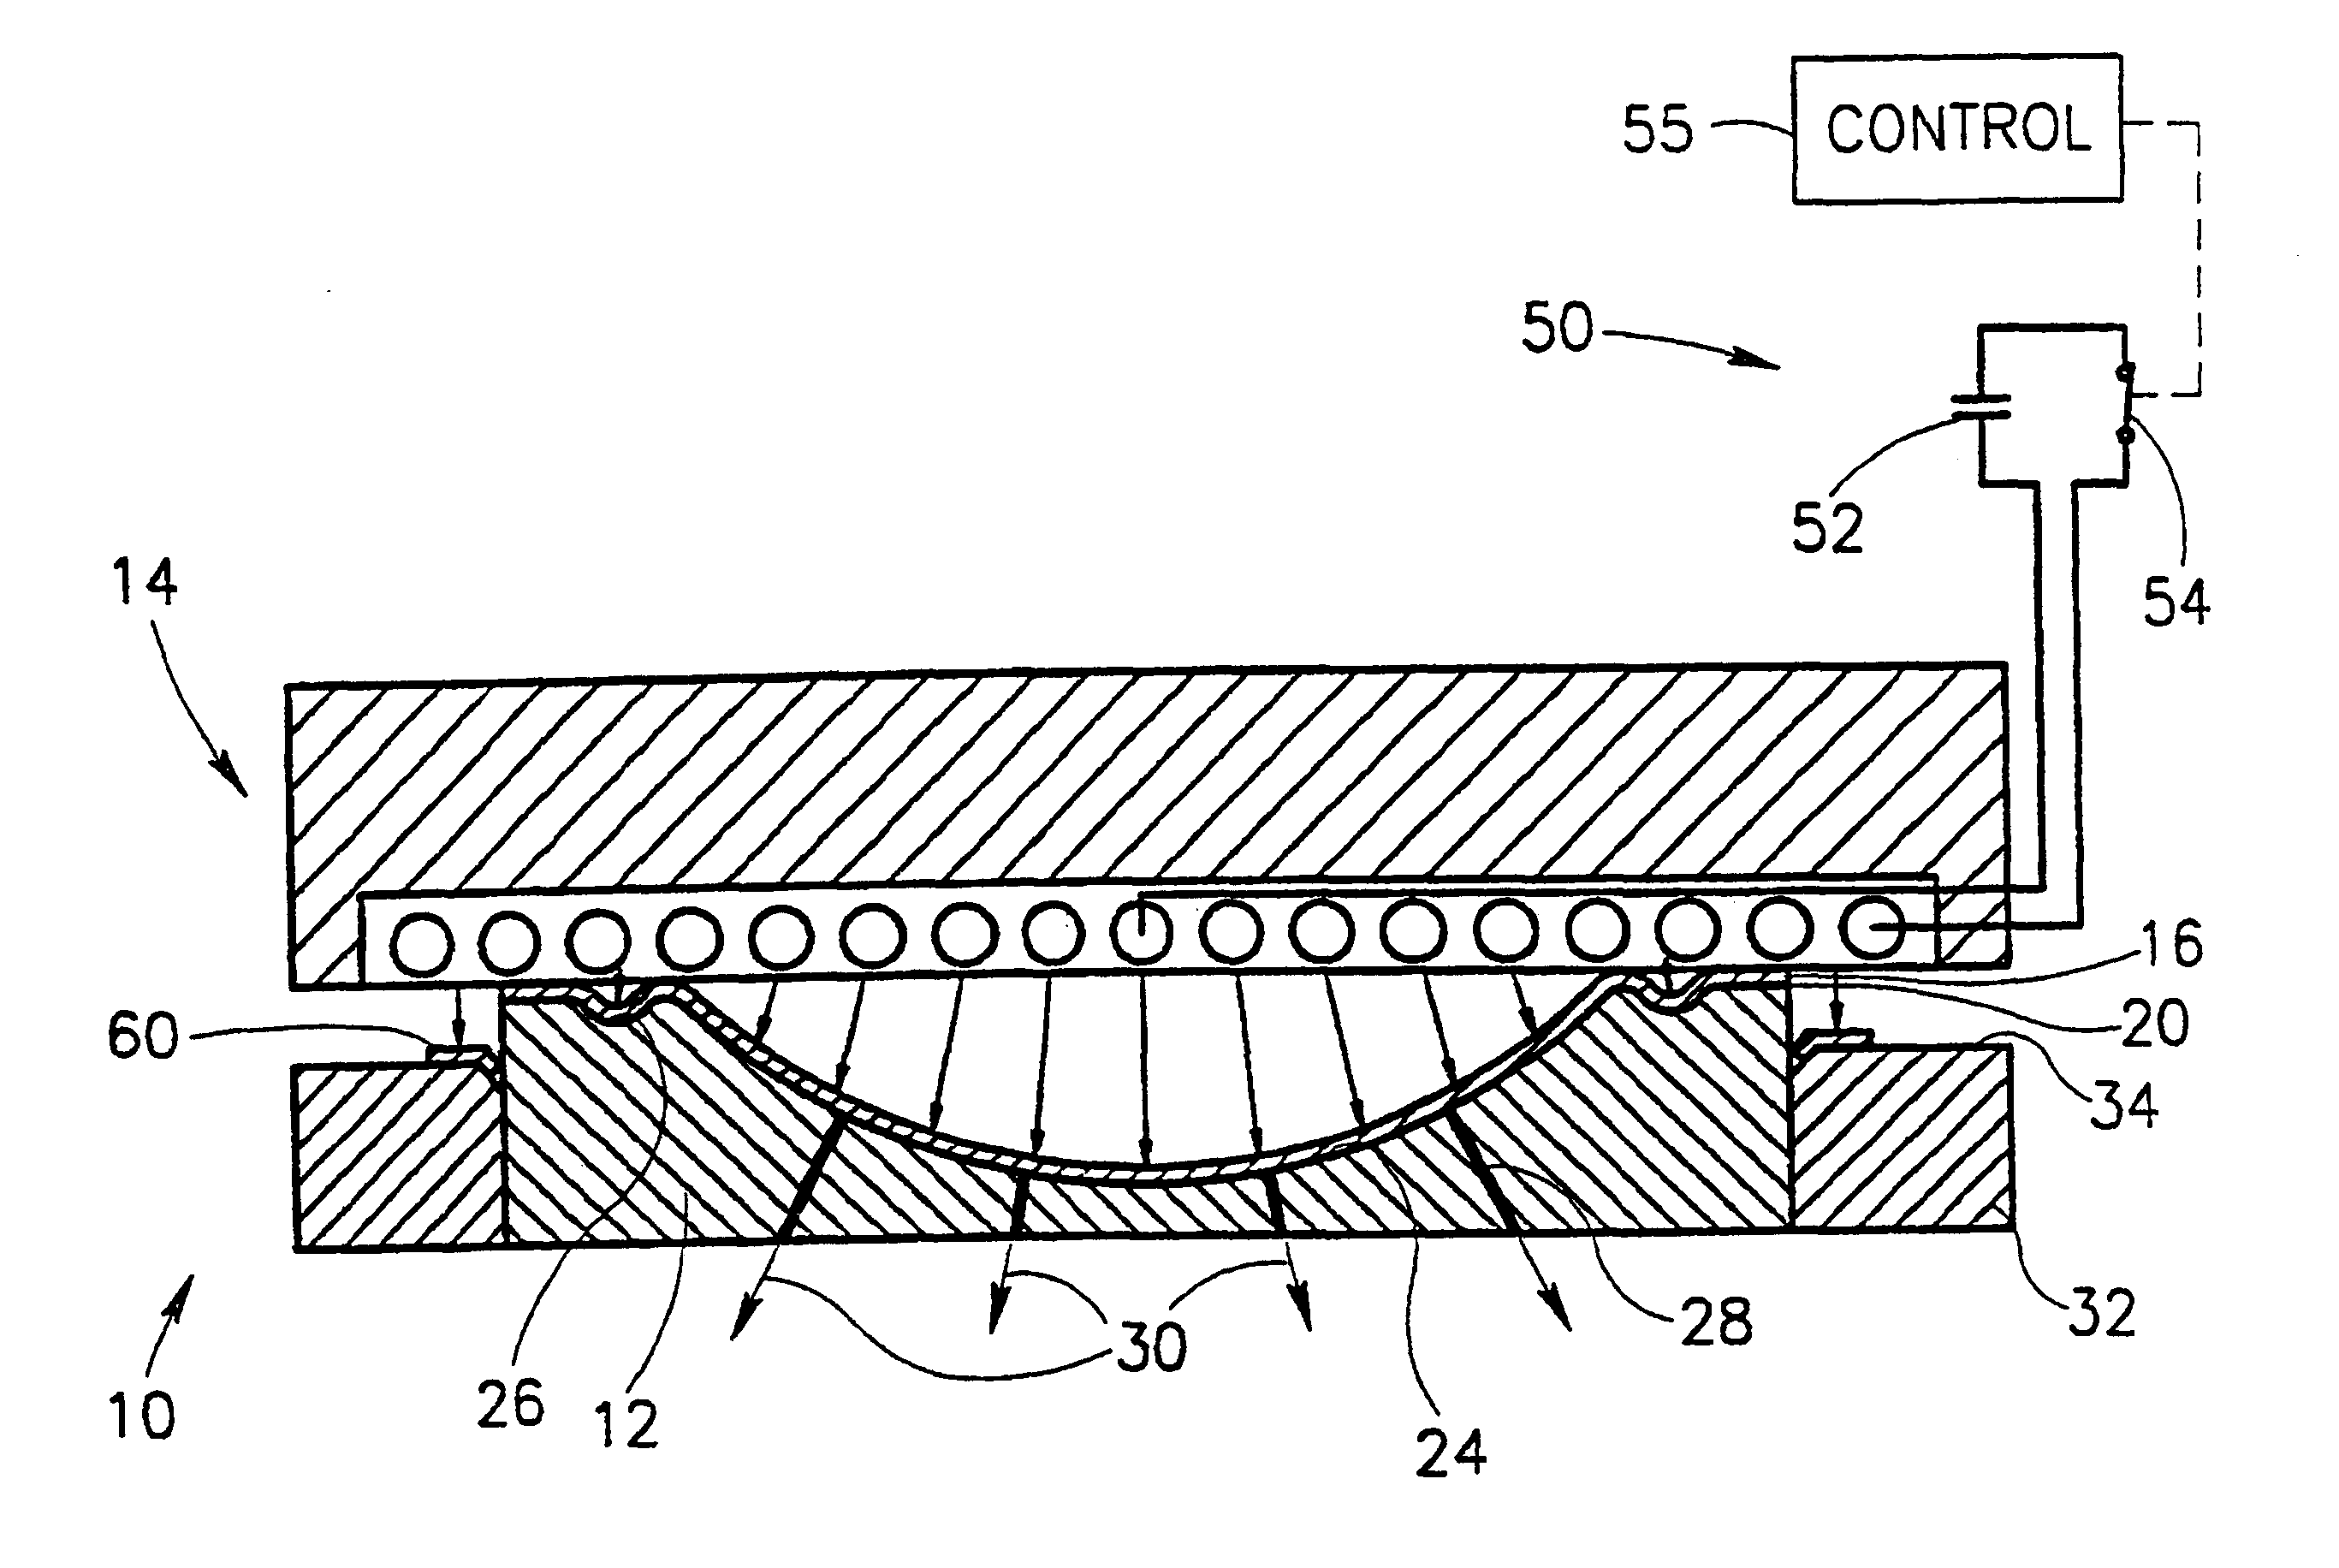 Apparatus and method for pulsed magnetic forming of a dish from a planar plate